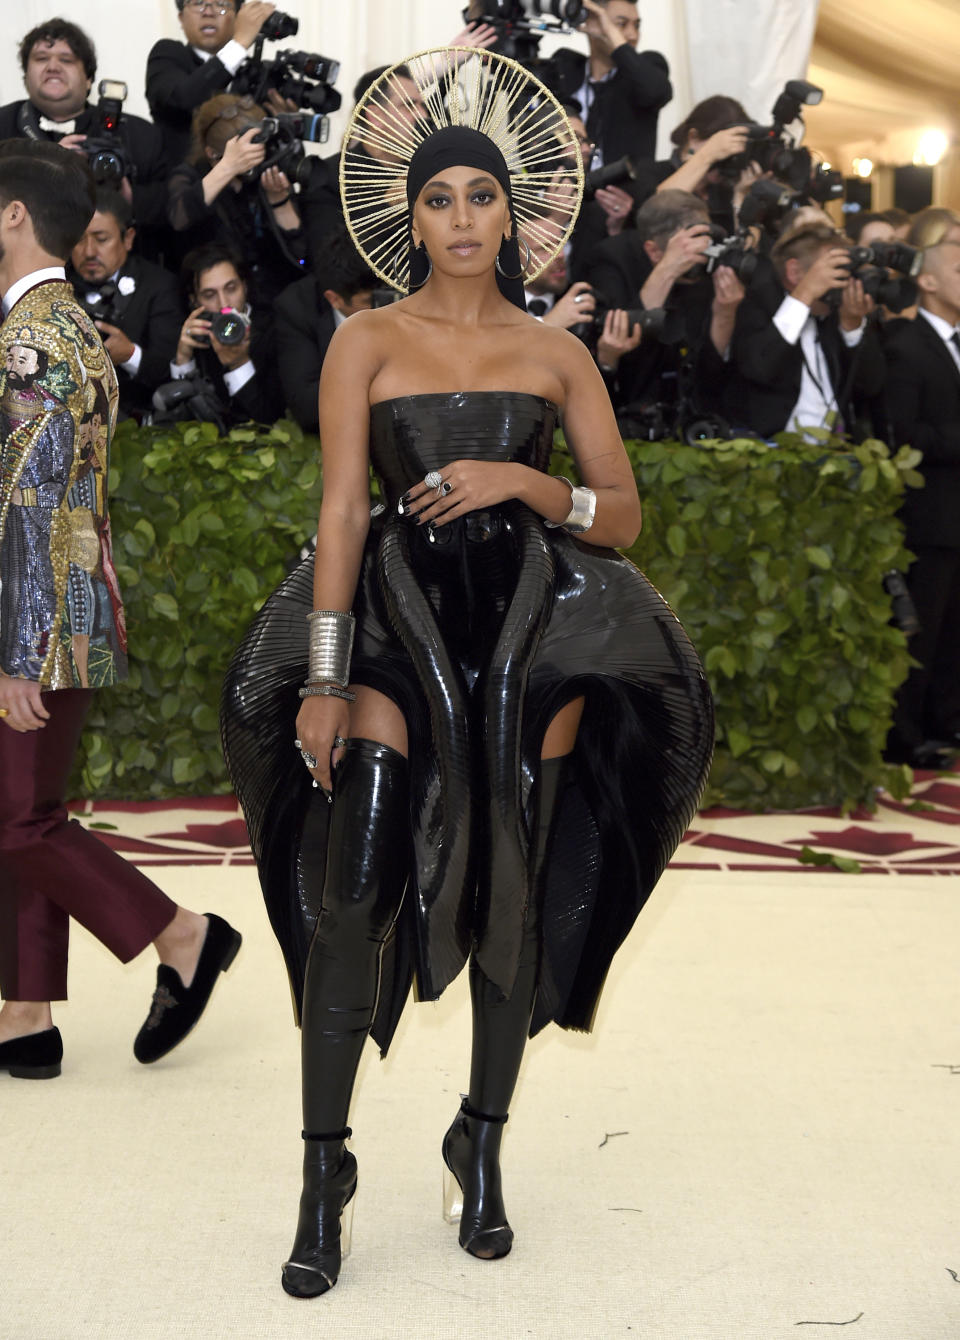 FILE - In this May 7, 2018 file photo, Solange attends The Metropolitan Museum of Art's Costume Institute benefit gala celebrating the opening of the Heavenly Bodies: Fashion and the Catholic Imagination exhibition in New York. Solange is 34 on June 24. (Photo by Evan Agostini/Invision/AP, File)